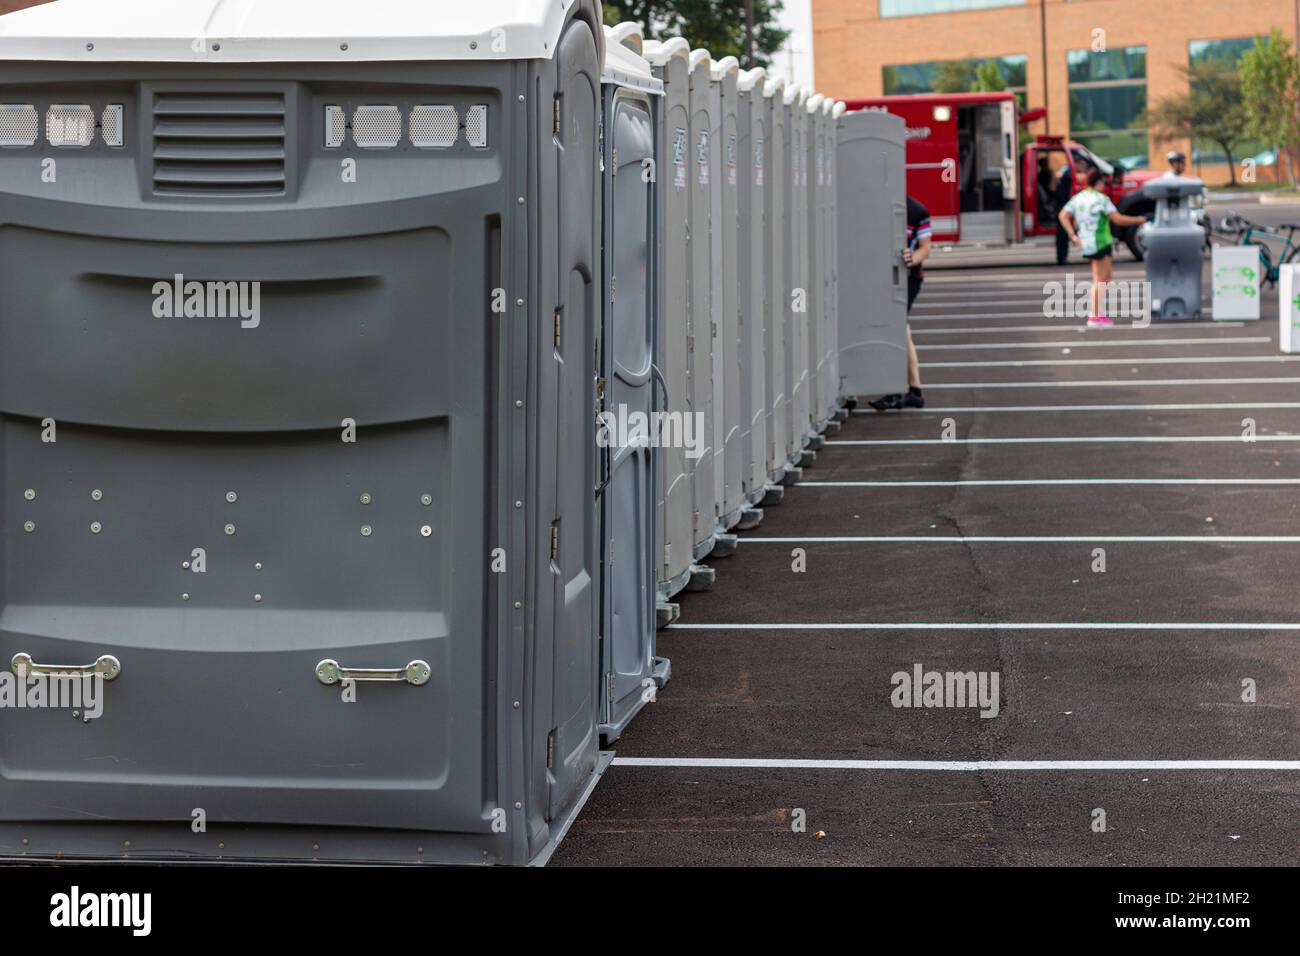 A line up of many grey portable toilets at a parking lot to be used by a crowd of people during an event or festival. These ensure people have access Stock Photo